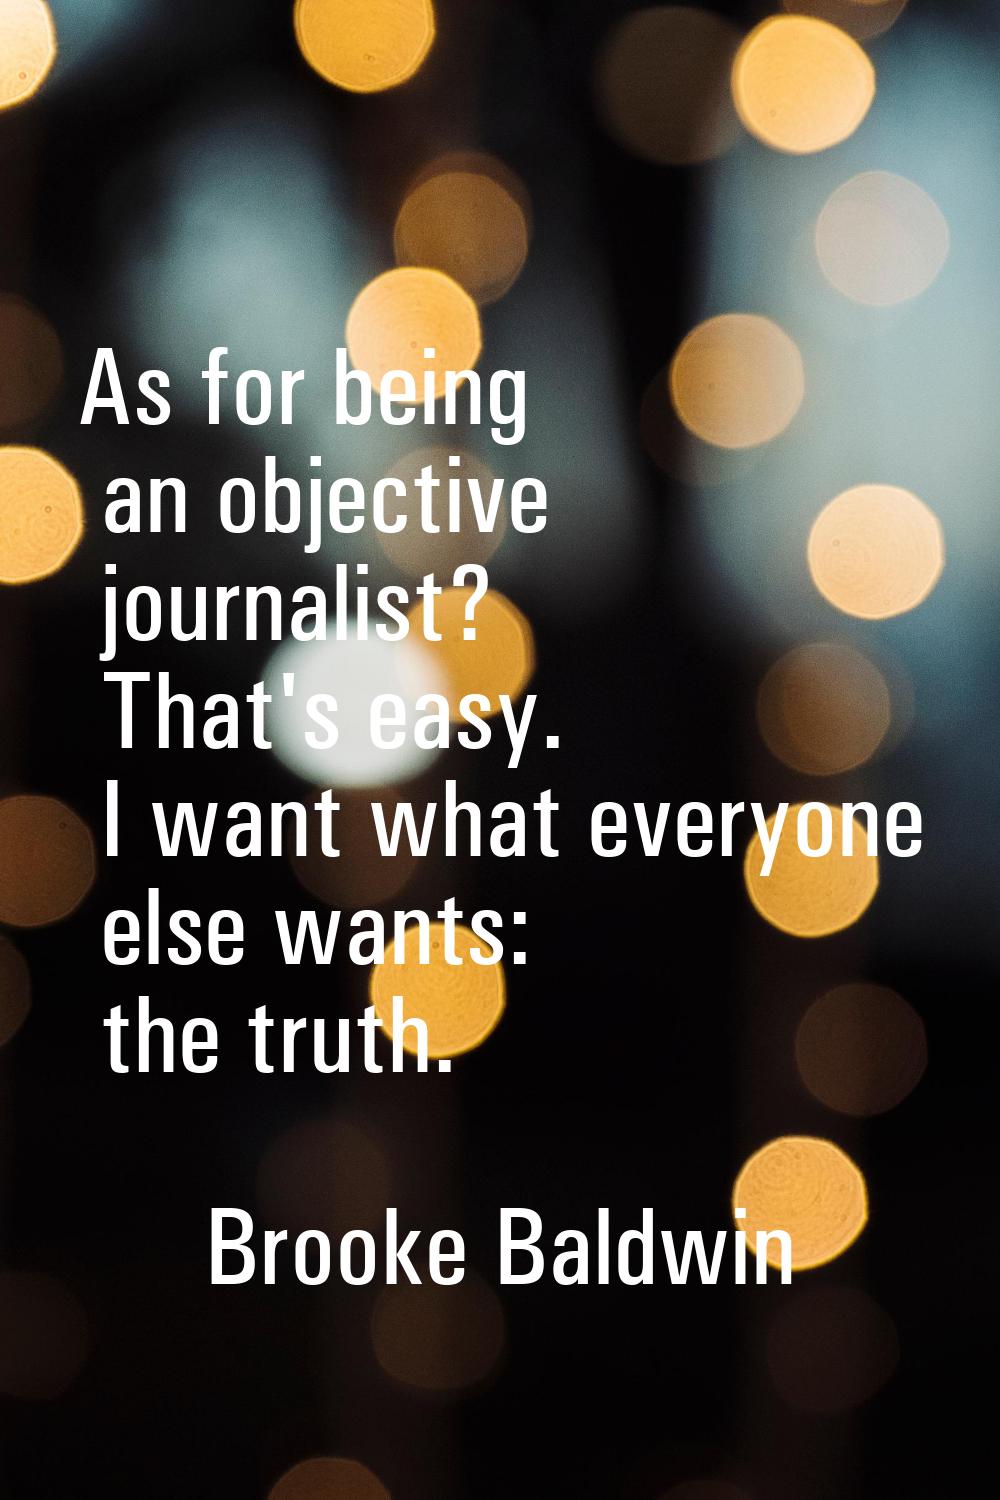 As for being an objective journalist? That's easy. I want what everyone else wants: the truth.